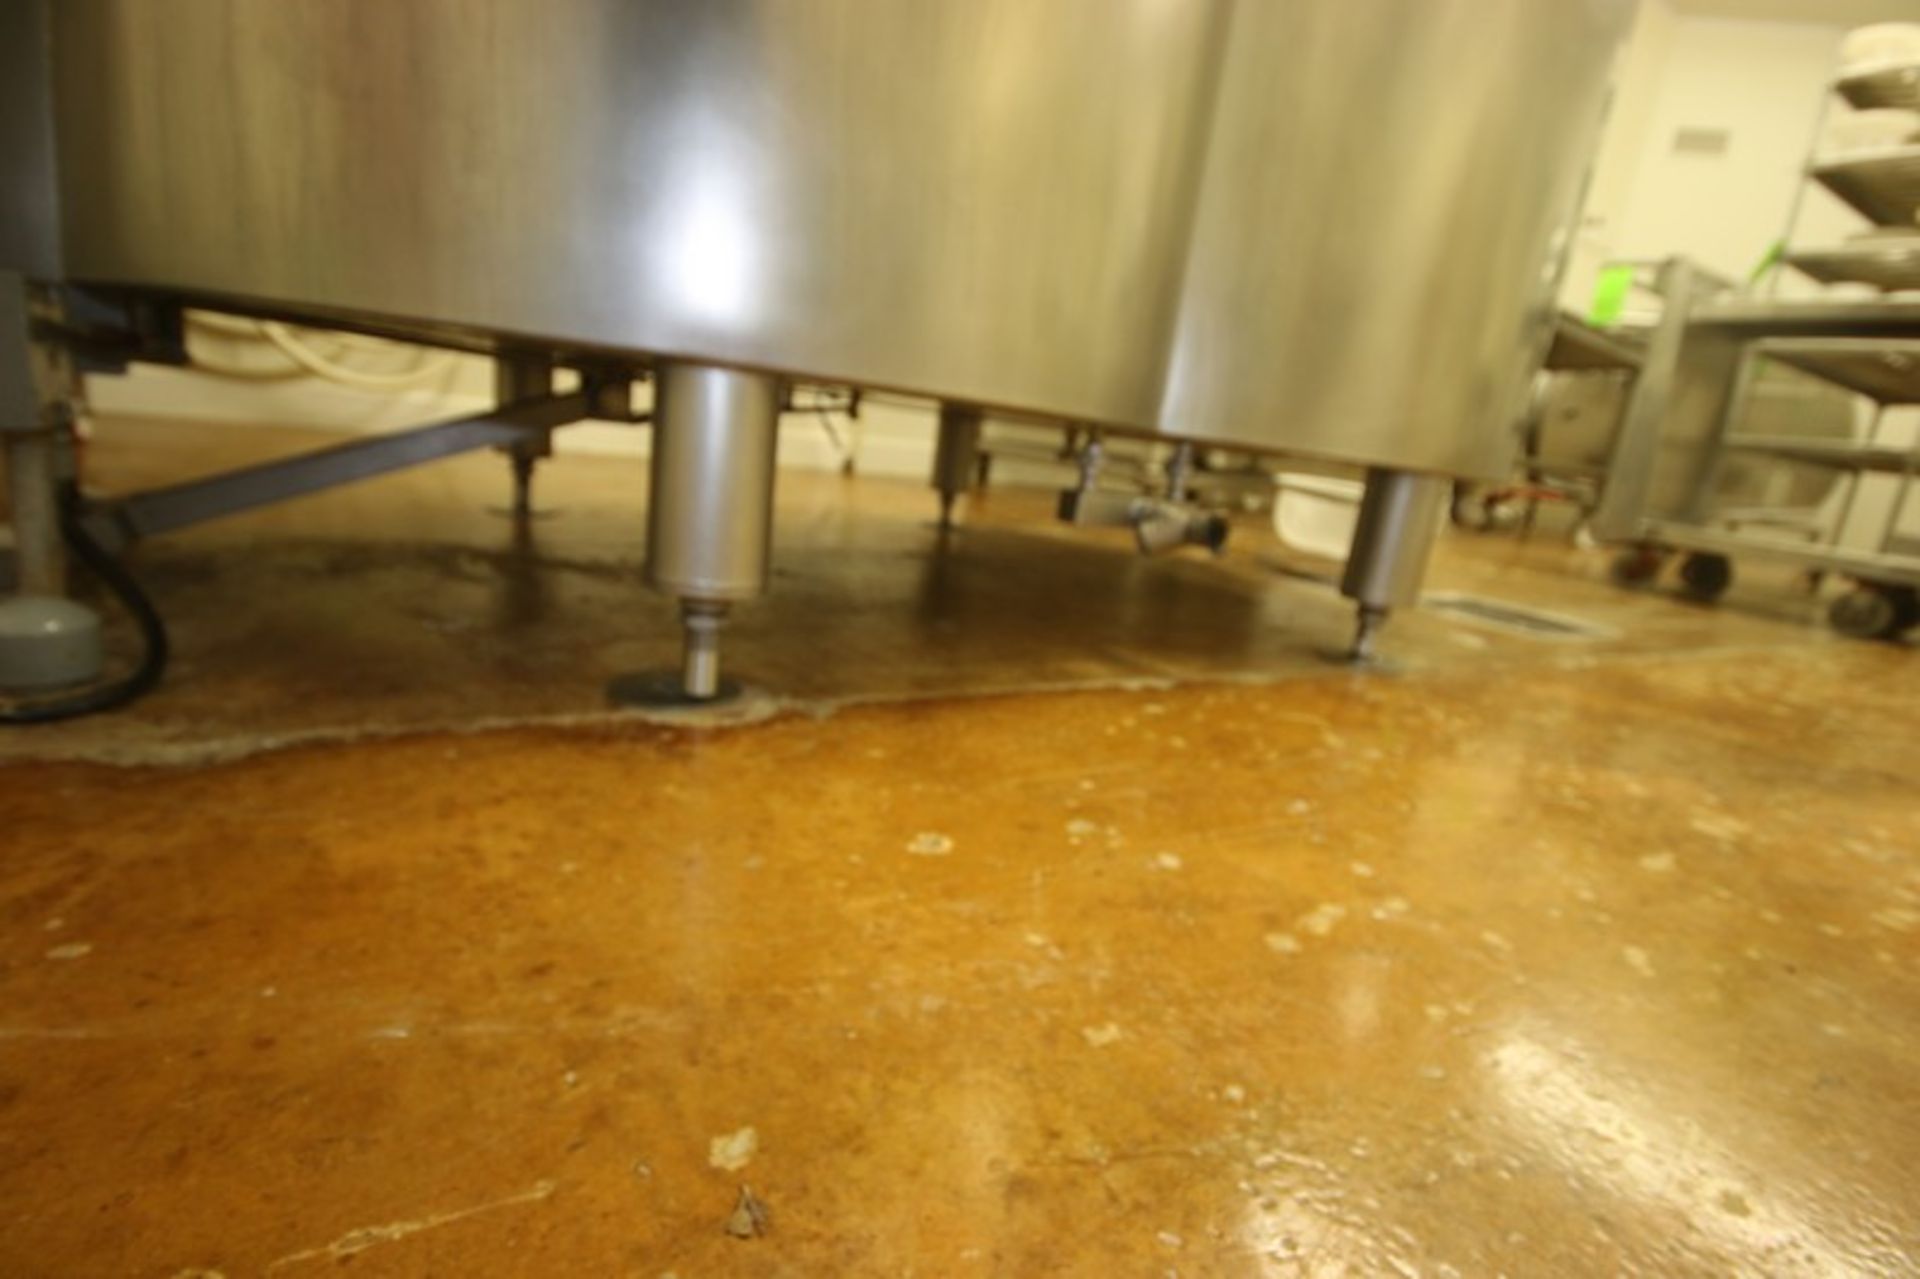 CVR 290 Gal. Double OO Cheesevat, S/N 0708019706, Includes Pump, Overall Dims.: Aprox. 8' L x 53" - Image 7 of 13